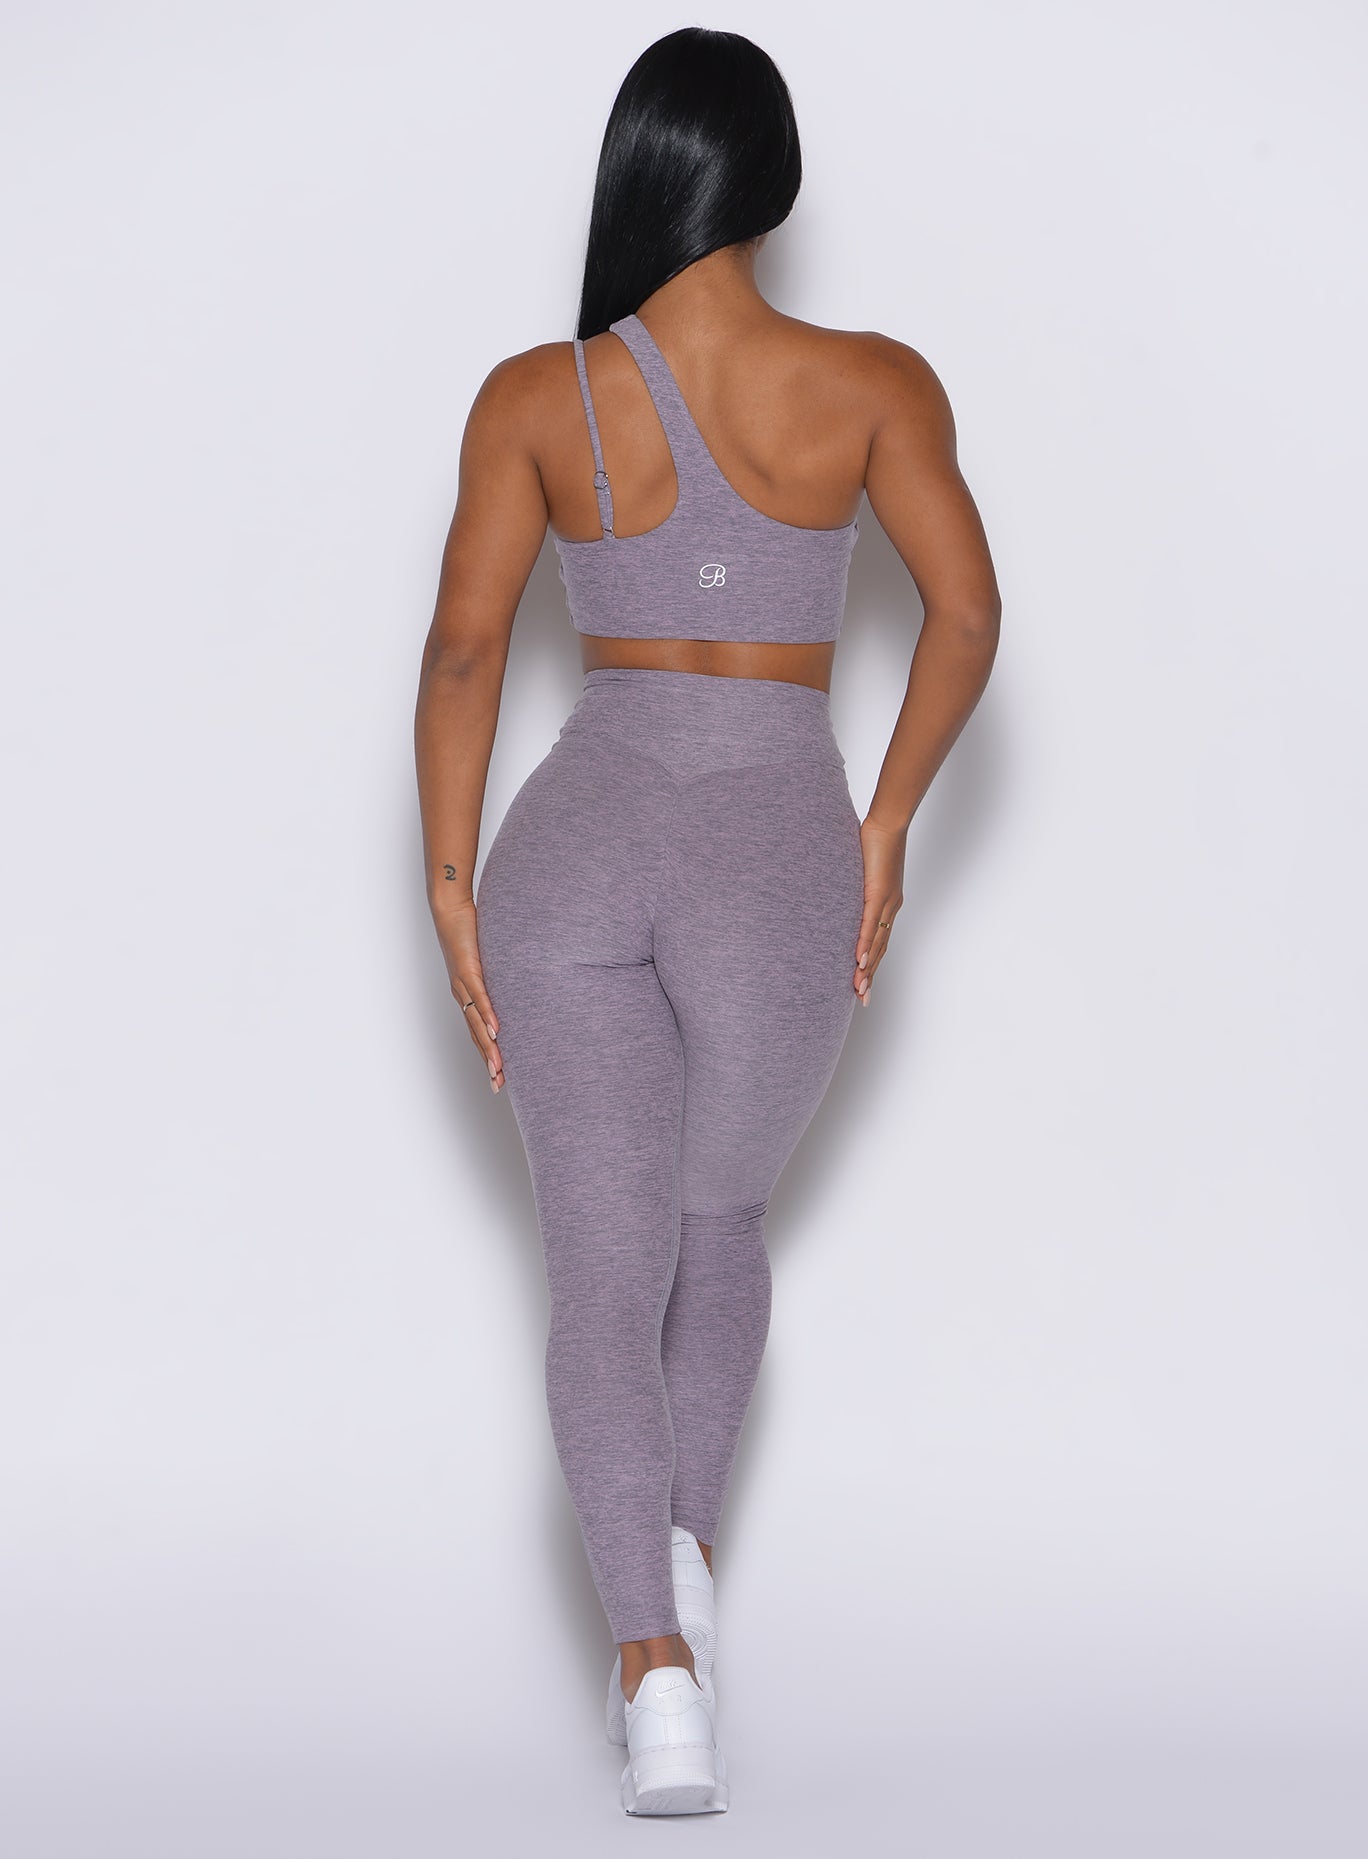 back profile view of a model wearing our V Active Leggings in lilac gray color along with the matching top